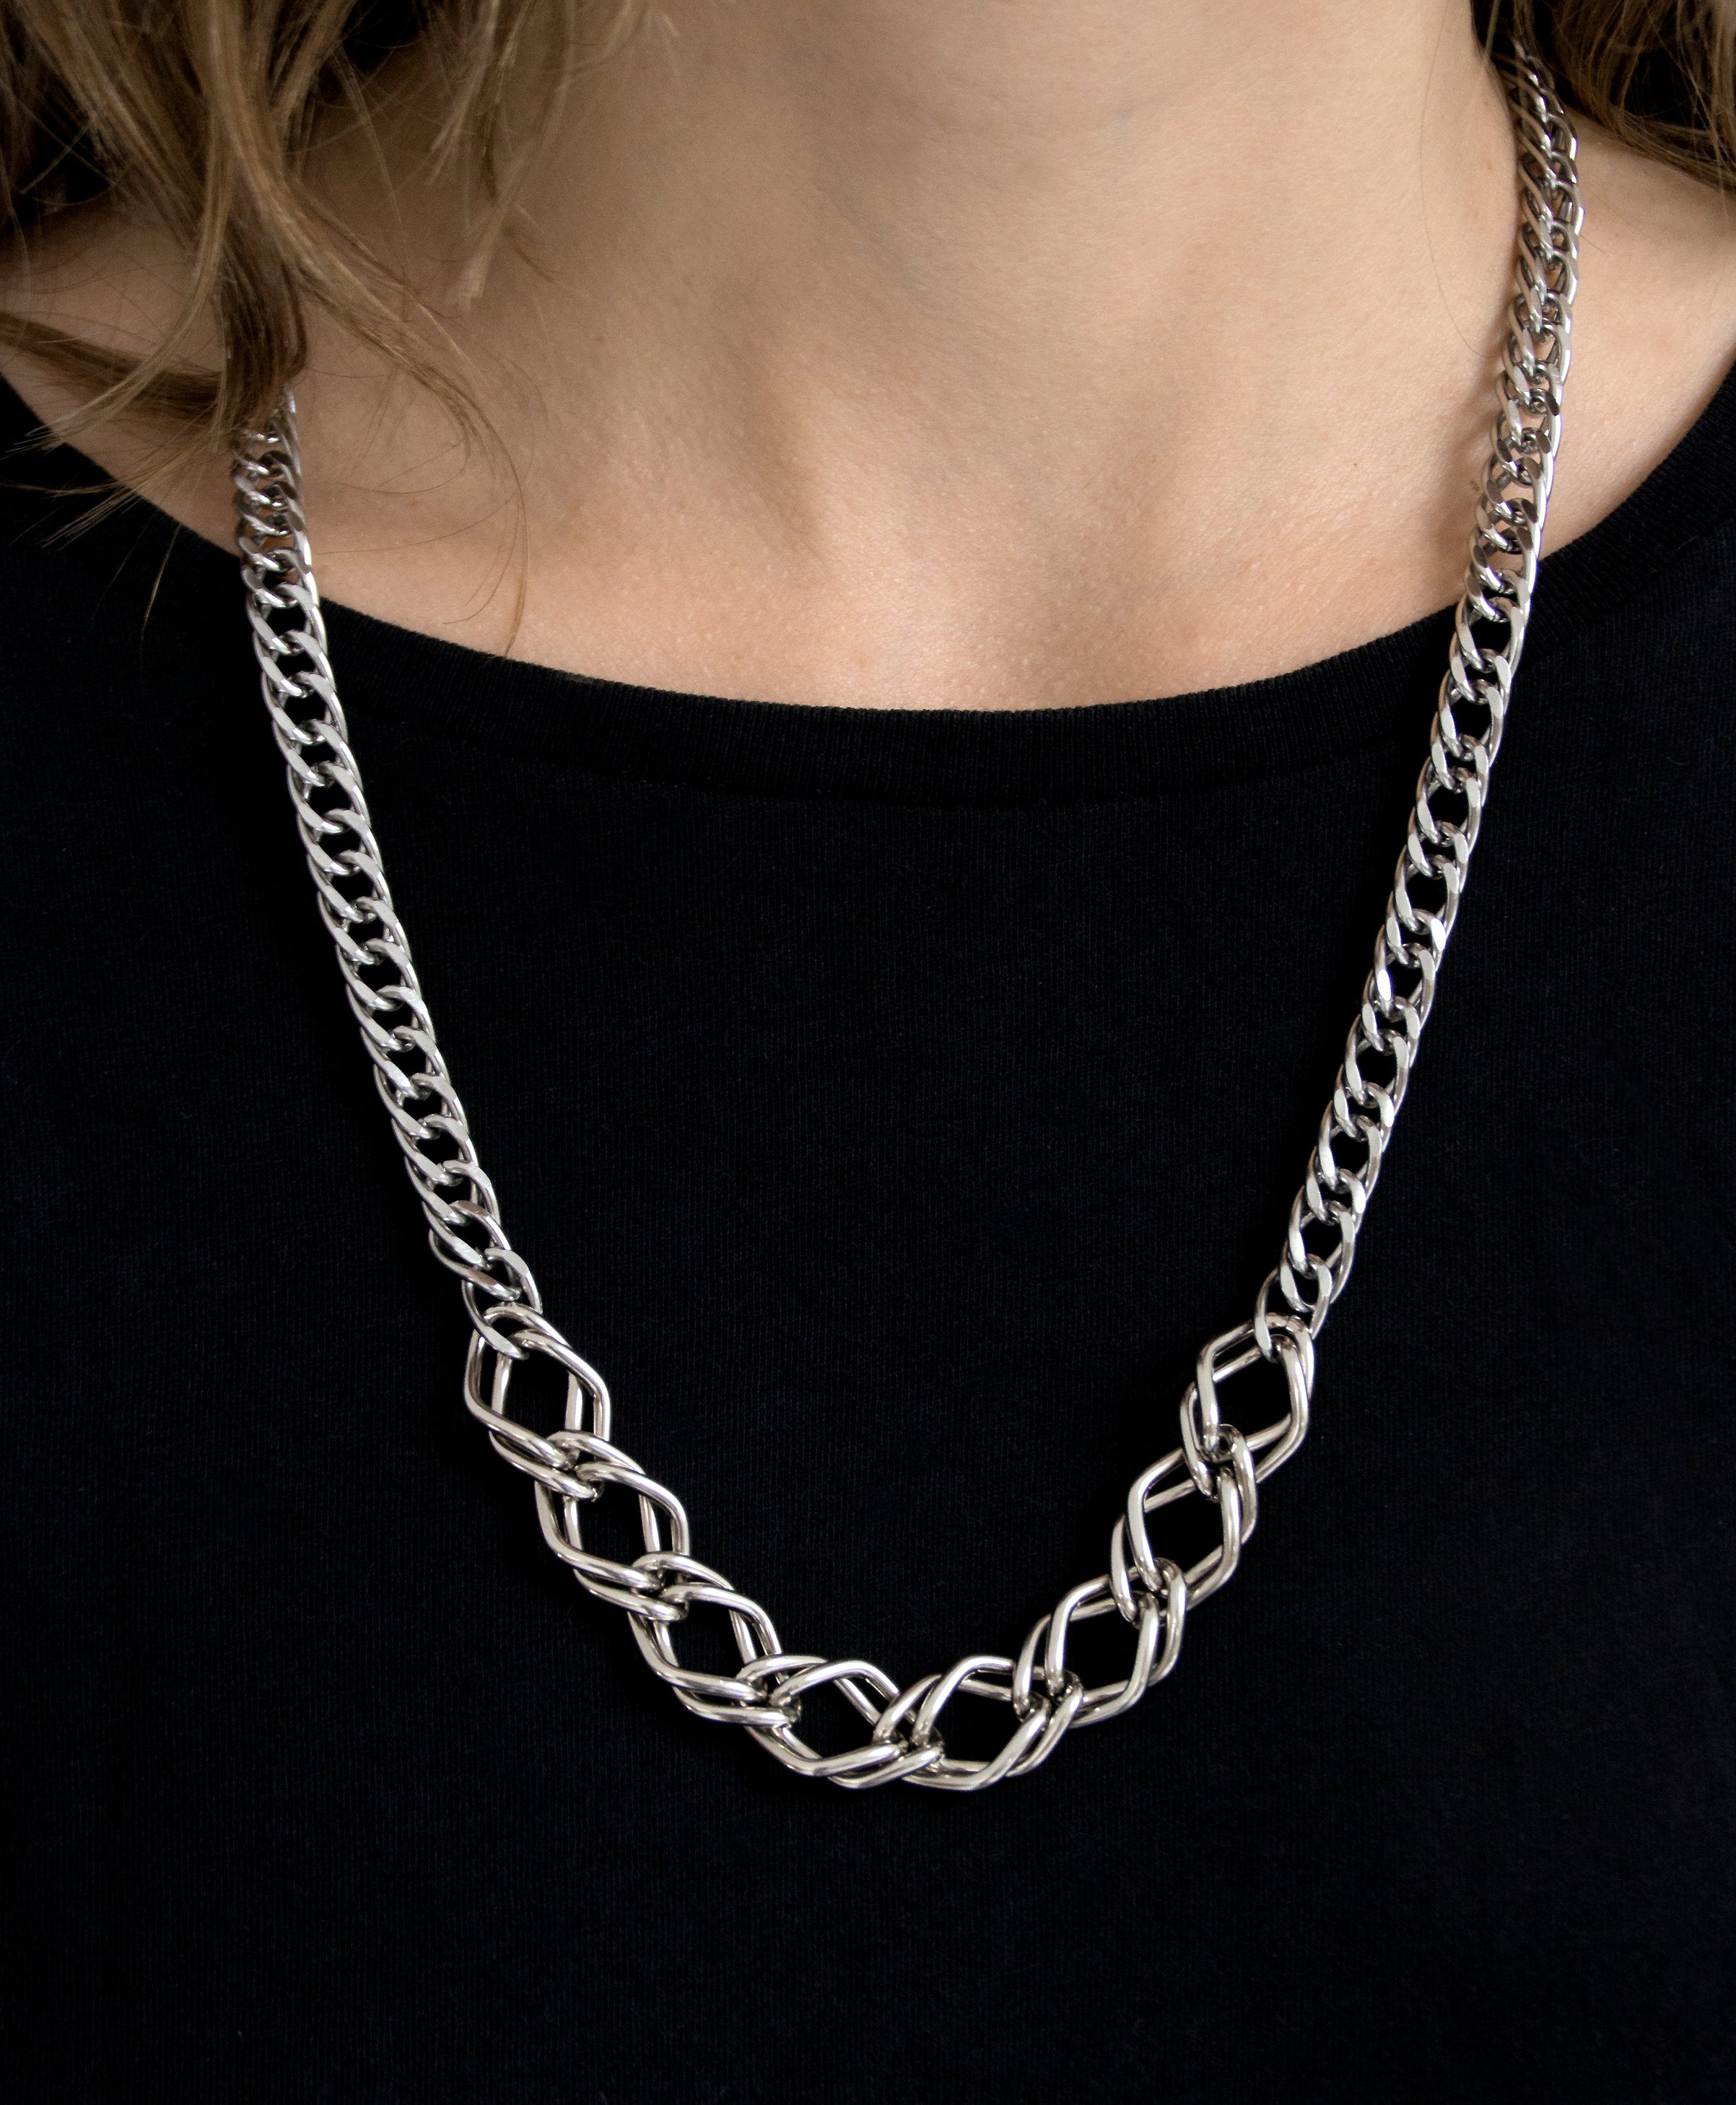 llayers-mens-women-jewelry-silver-stainlesssteel-choker-chain-necklace-unchained-007-Brooklyn-New-York-3